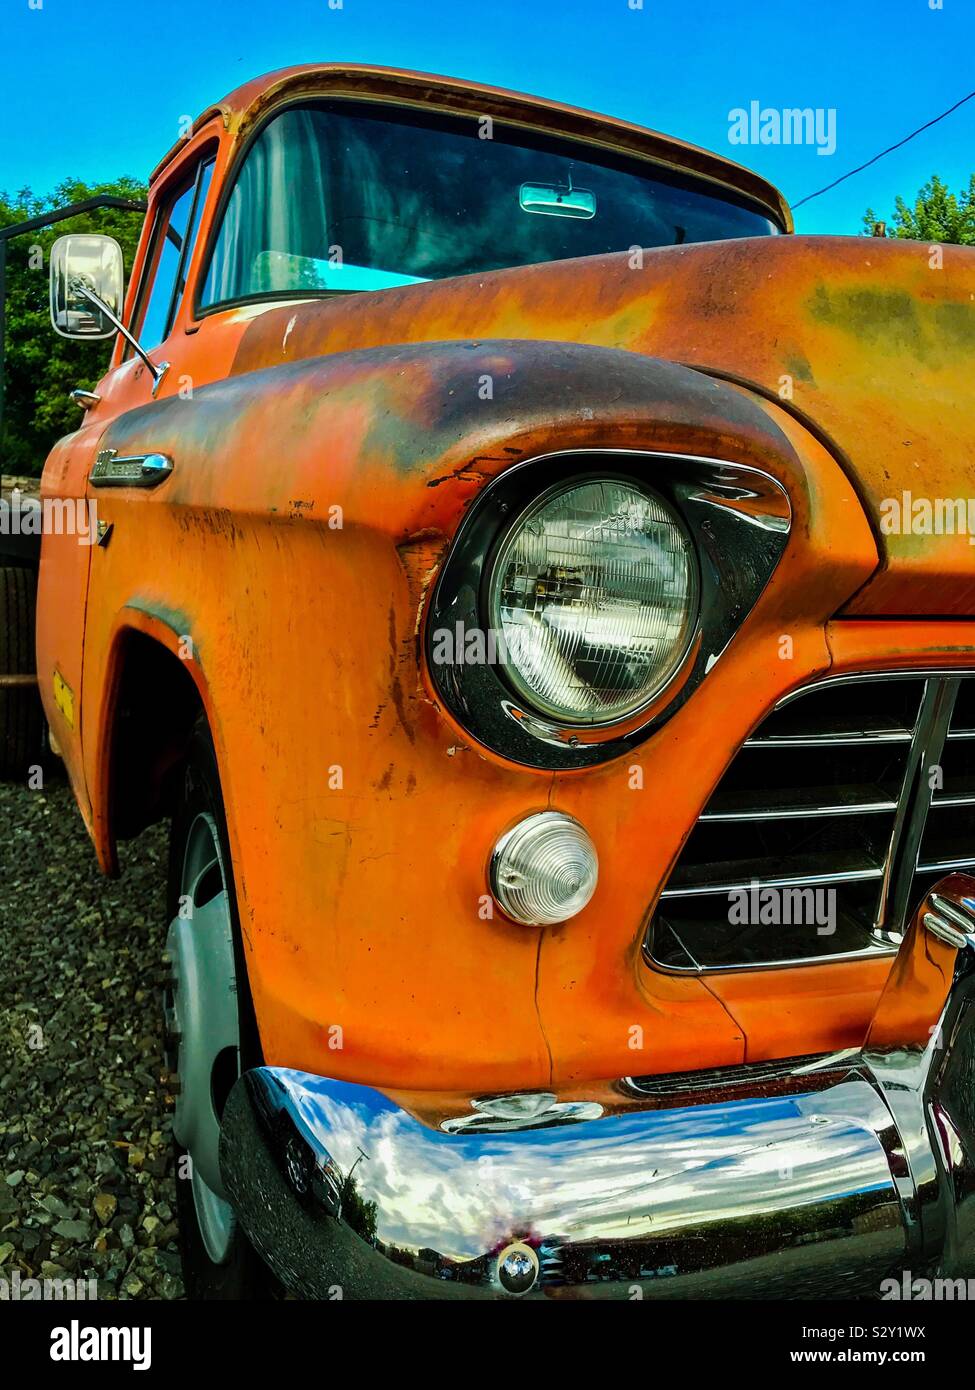 Rusty mid fifties vintage Chevrolet work truck- closeup on headlight and bumper Stock Photo